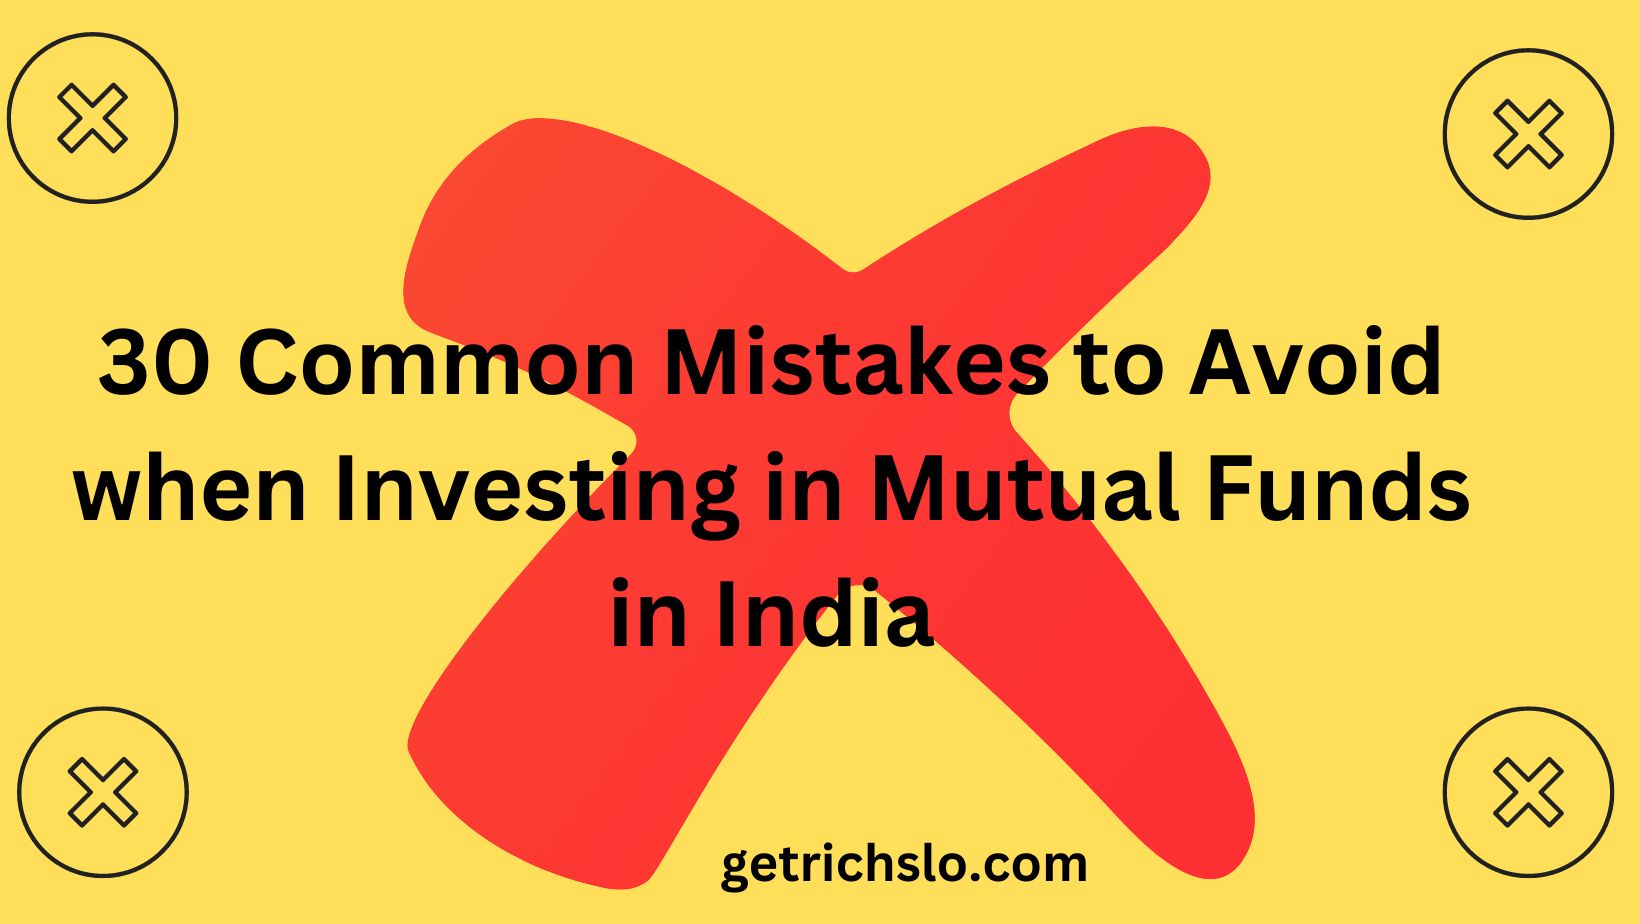 30 common mutual fund investment mistakes